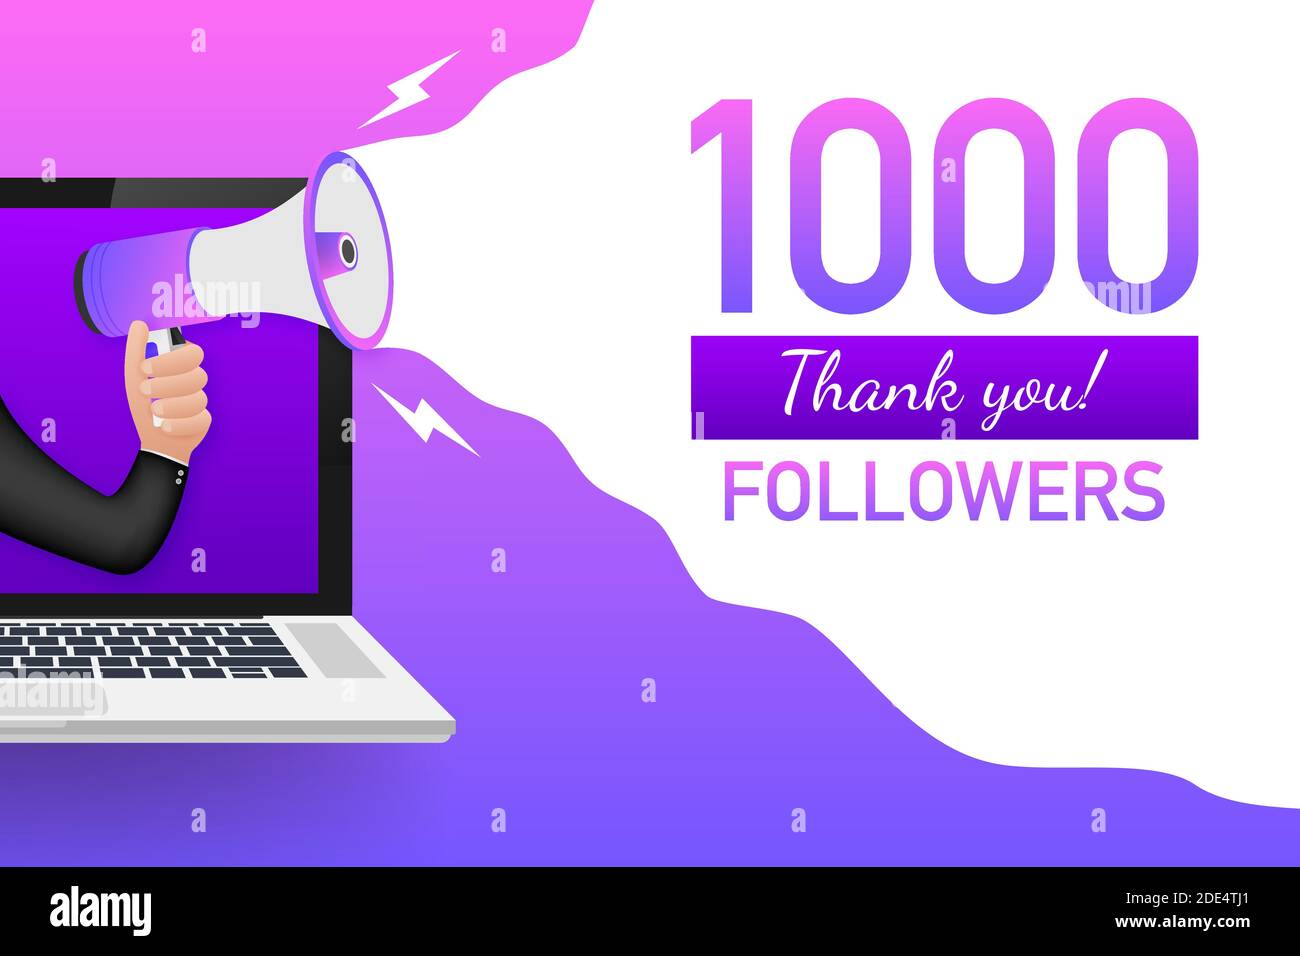 1000 Followers thank you card with laptop Template for social media post. 1K subscribers vivid banner. Vector illustration. Stock Vector